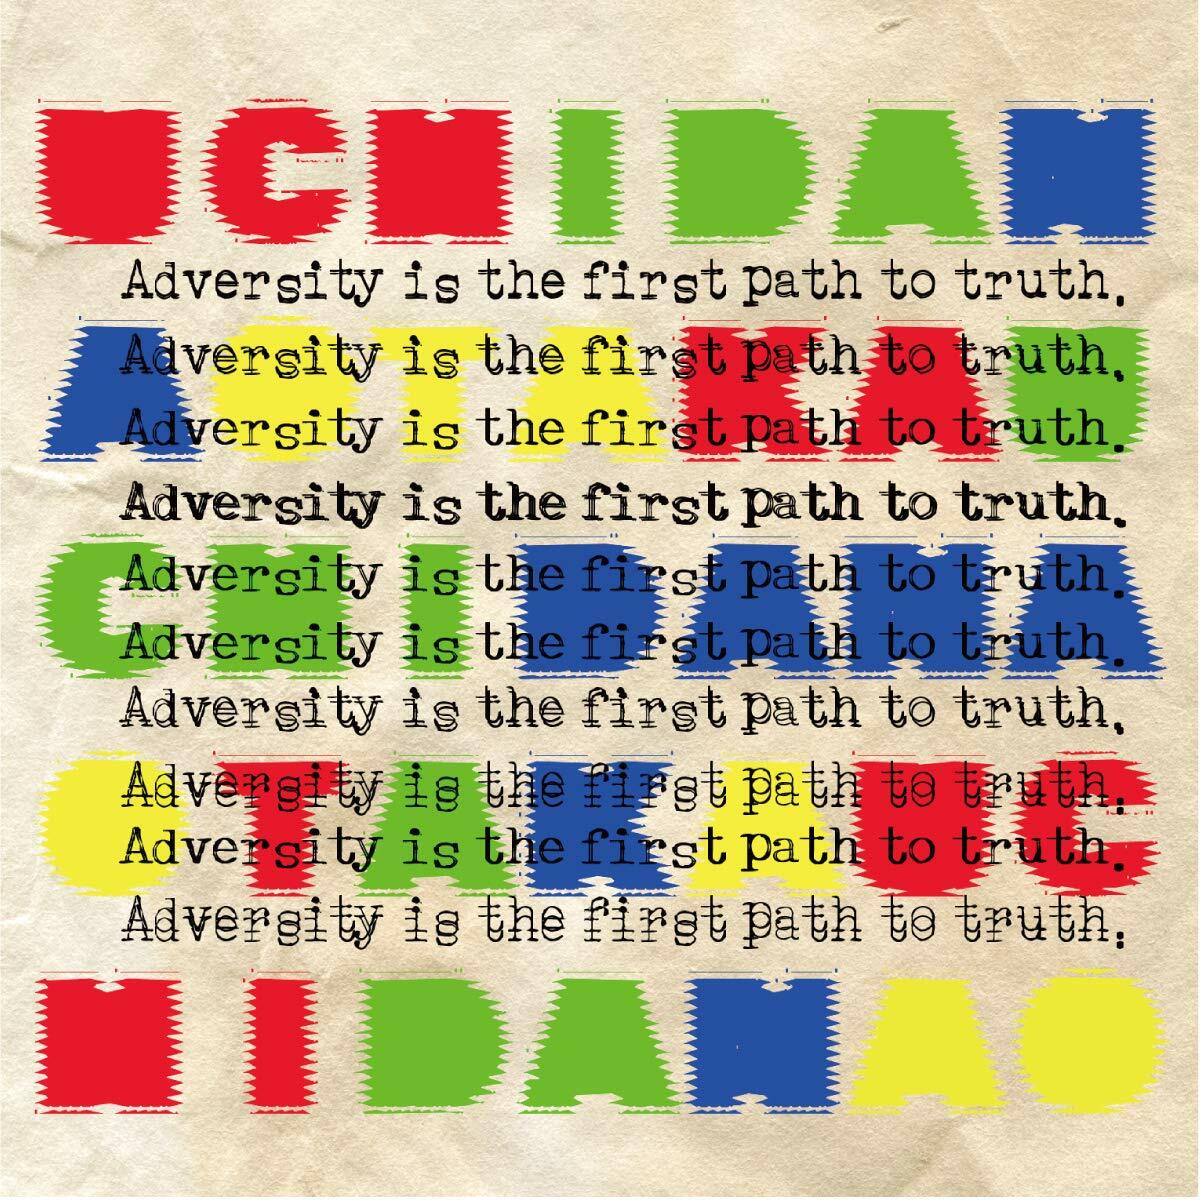 Adversity is the first path to truth. (CD)